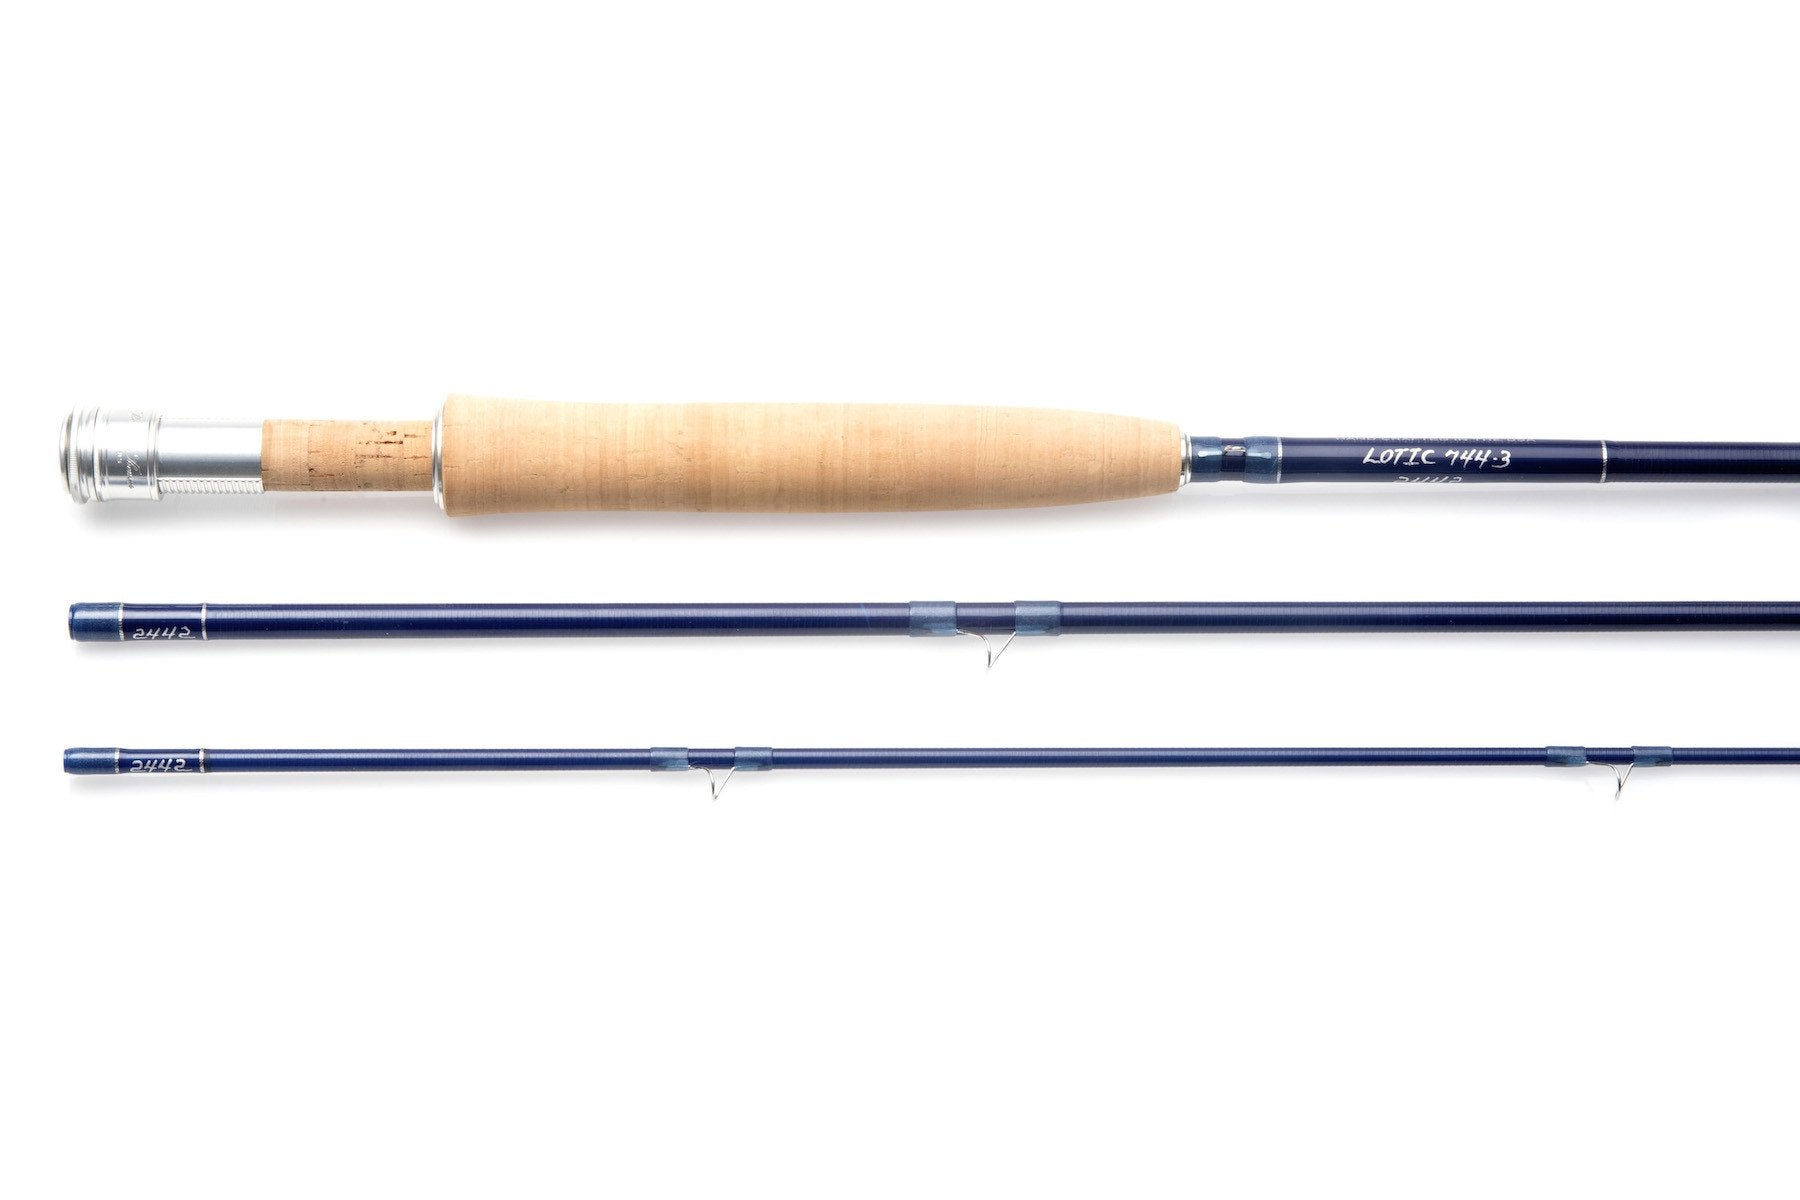 Thomas and Thomas Lotic glass fly rods